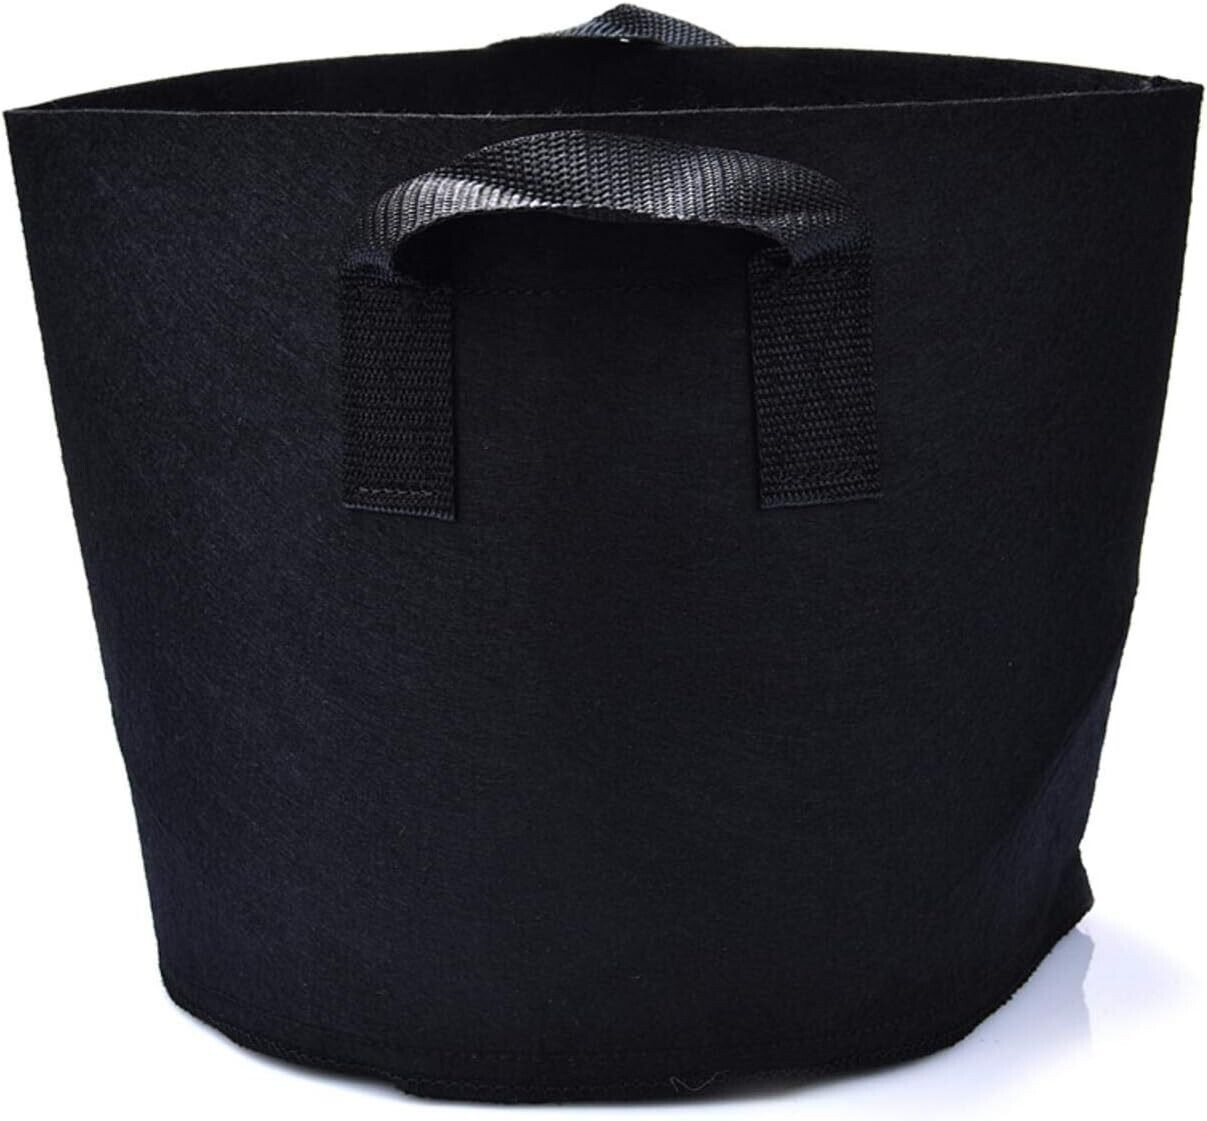 Planting Bag/Grow Bag Fabric Pots Nursery Bags with Handles Plant Seeding Bags Container - 10 Gallon Capacity